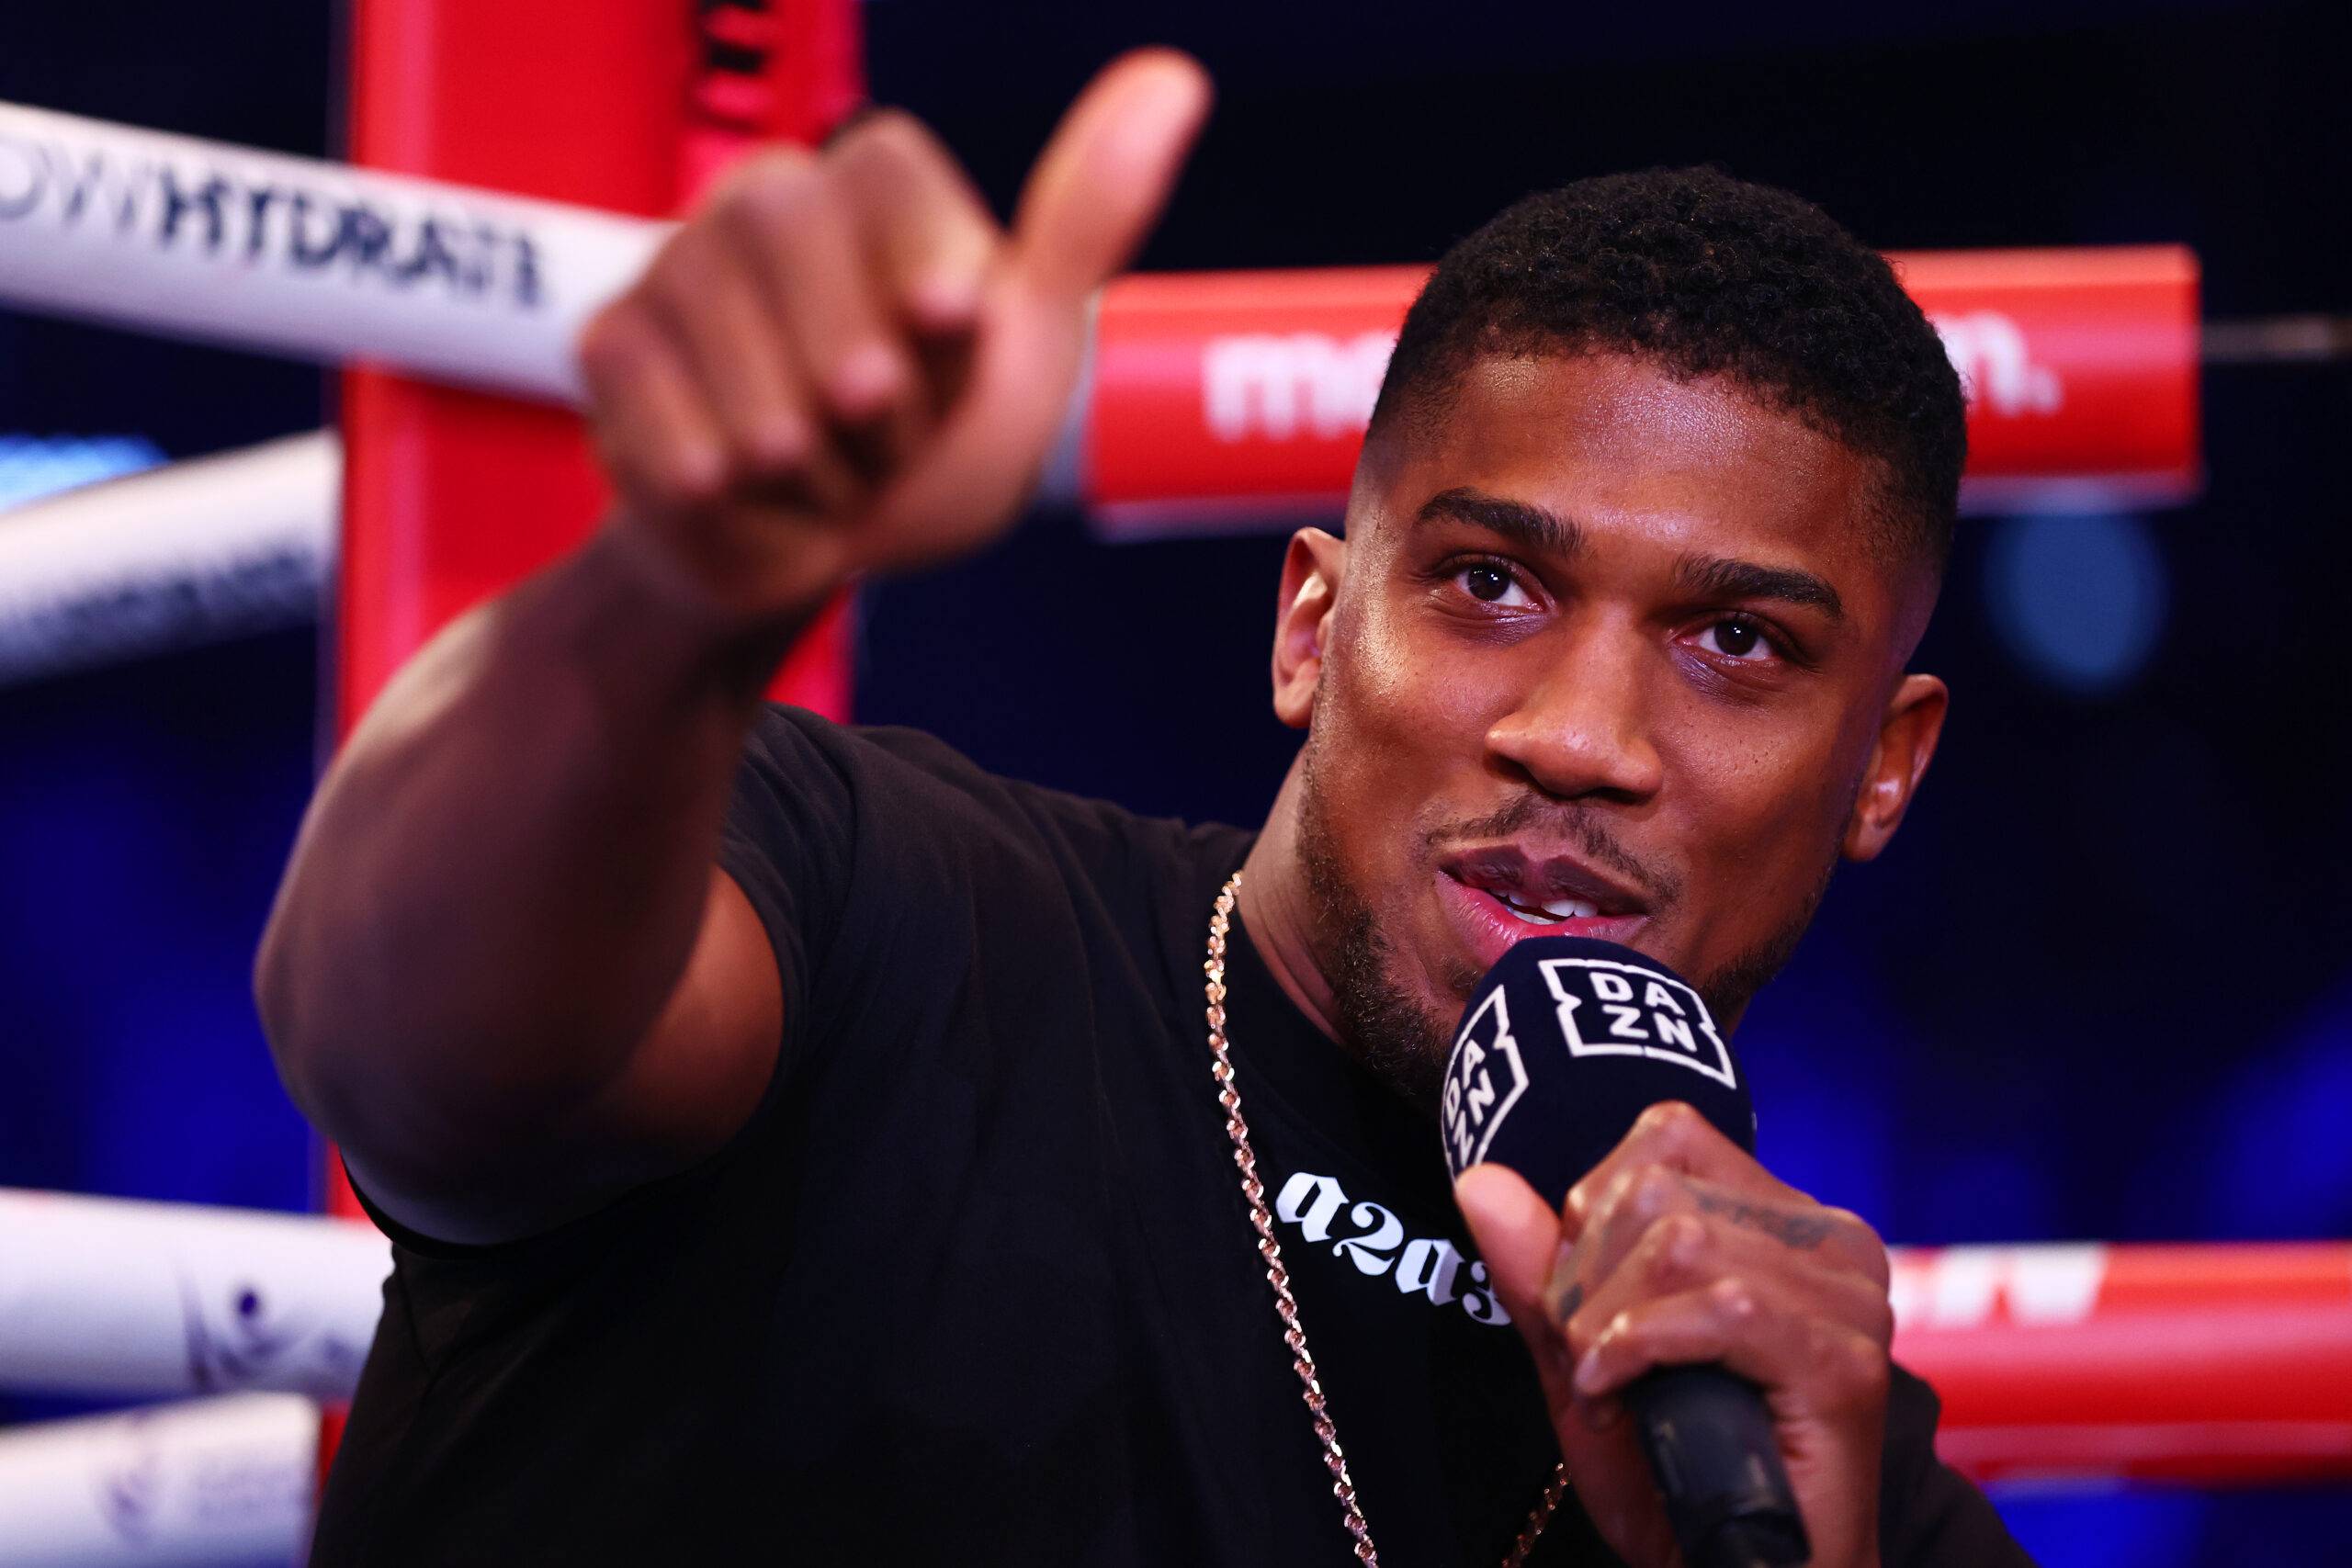 Anthony Joshua could take on Dillian Whyte in a rematch in the first half of 2023, according to boxing journalist Dan Rafael